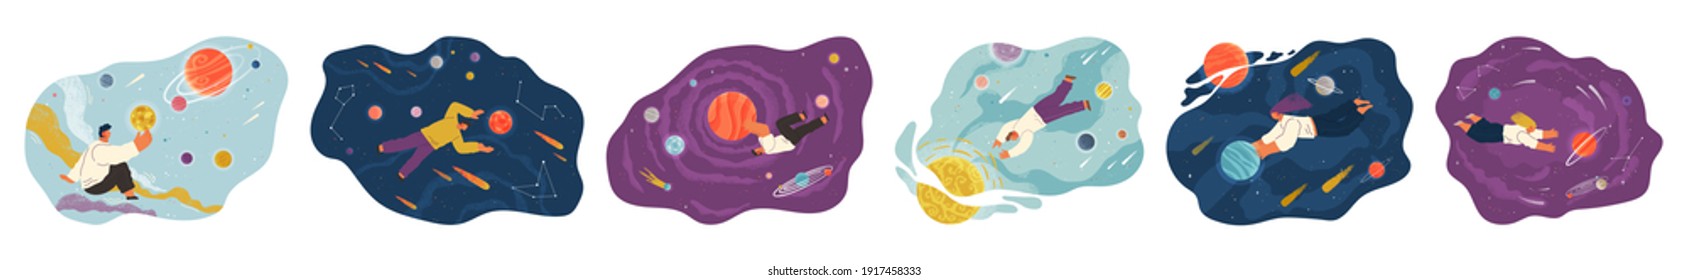 People flying in space vector flat scenes set with planets and stars cartoon cosmic illustration. Characters holding planet with dream universe. Person flies in blue sky space. Abstract style people